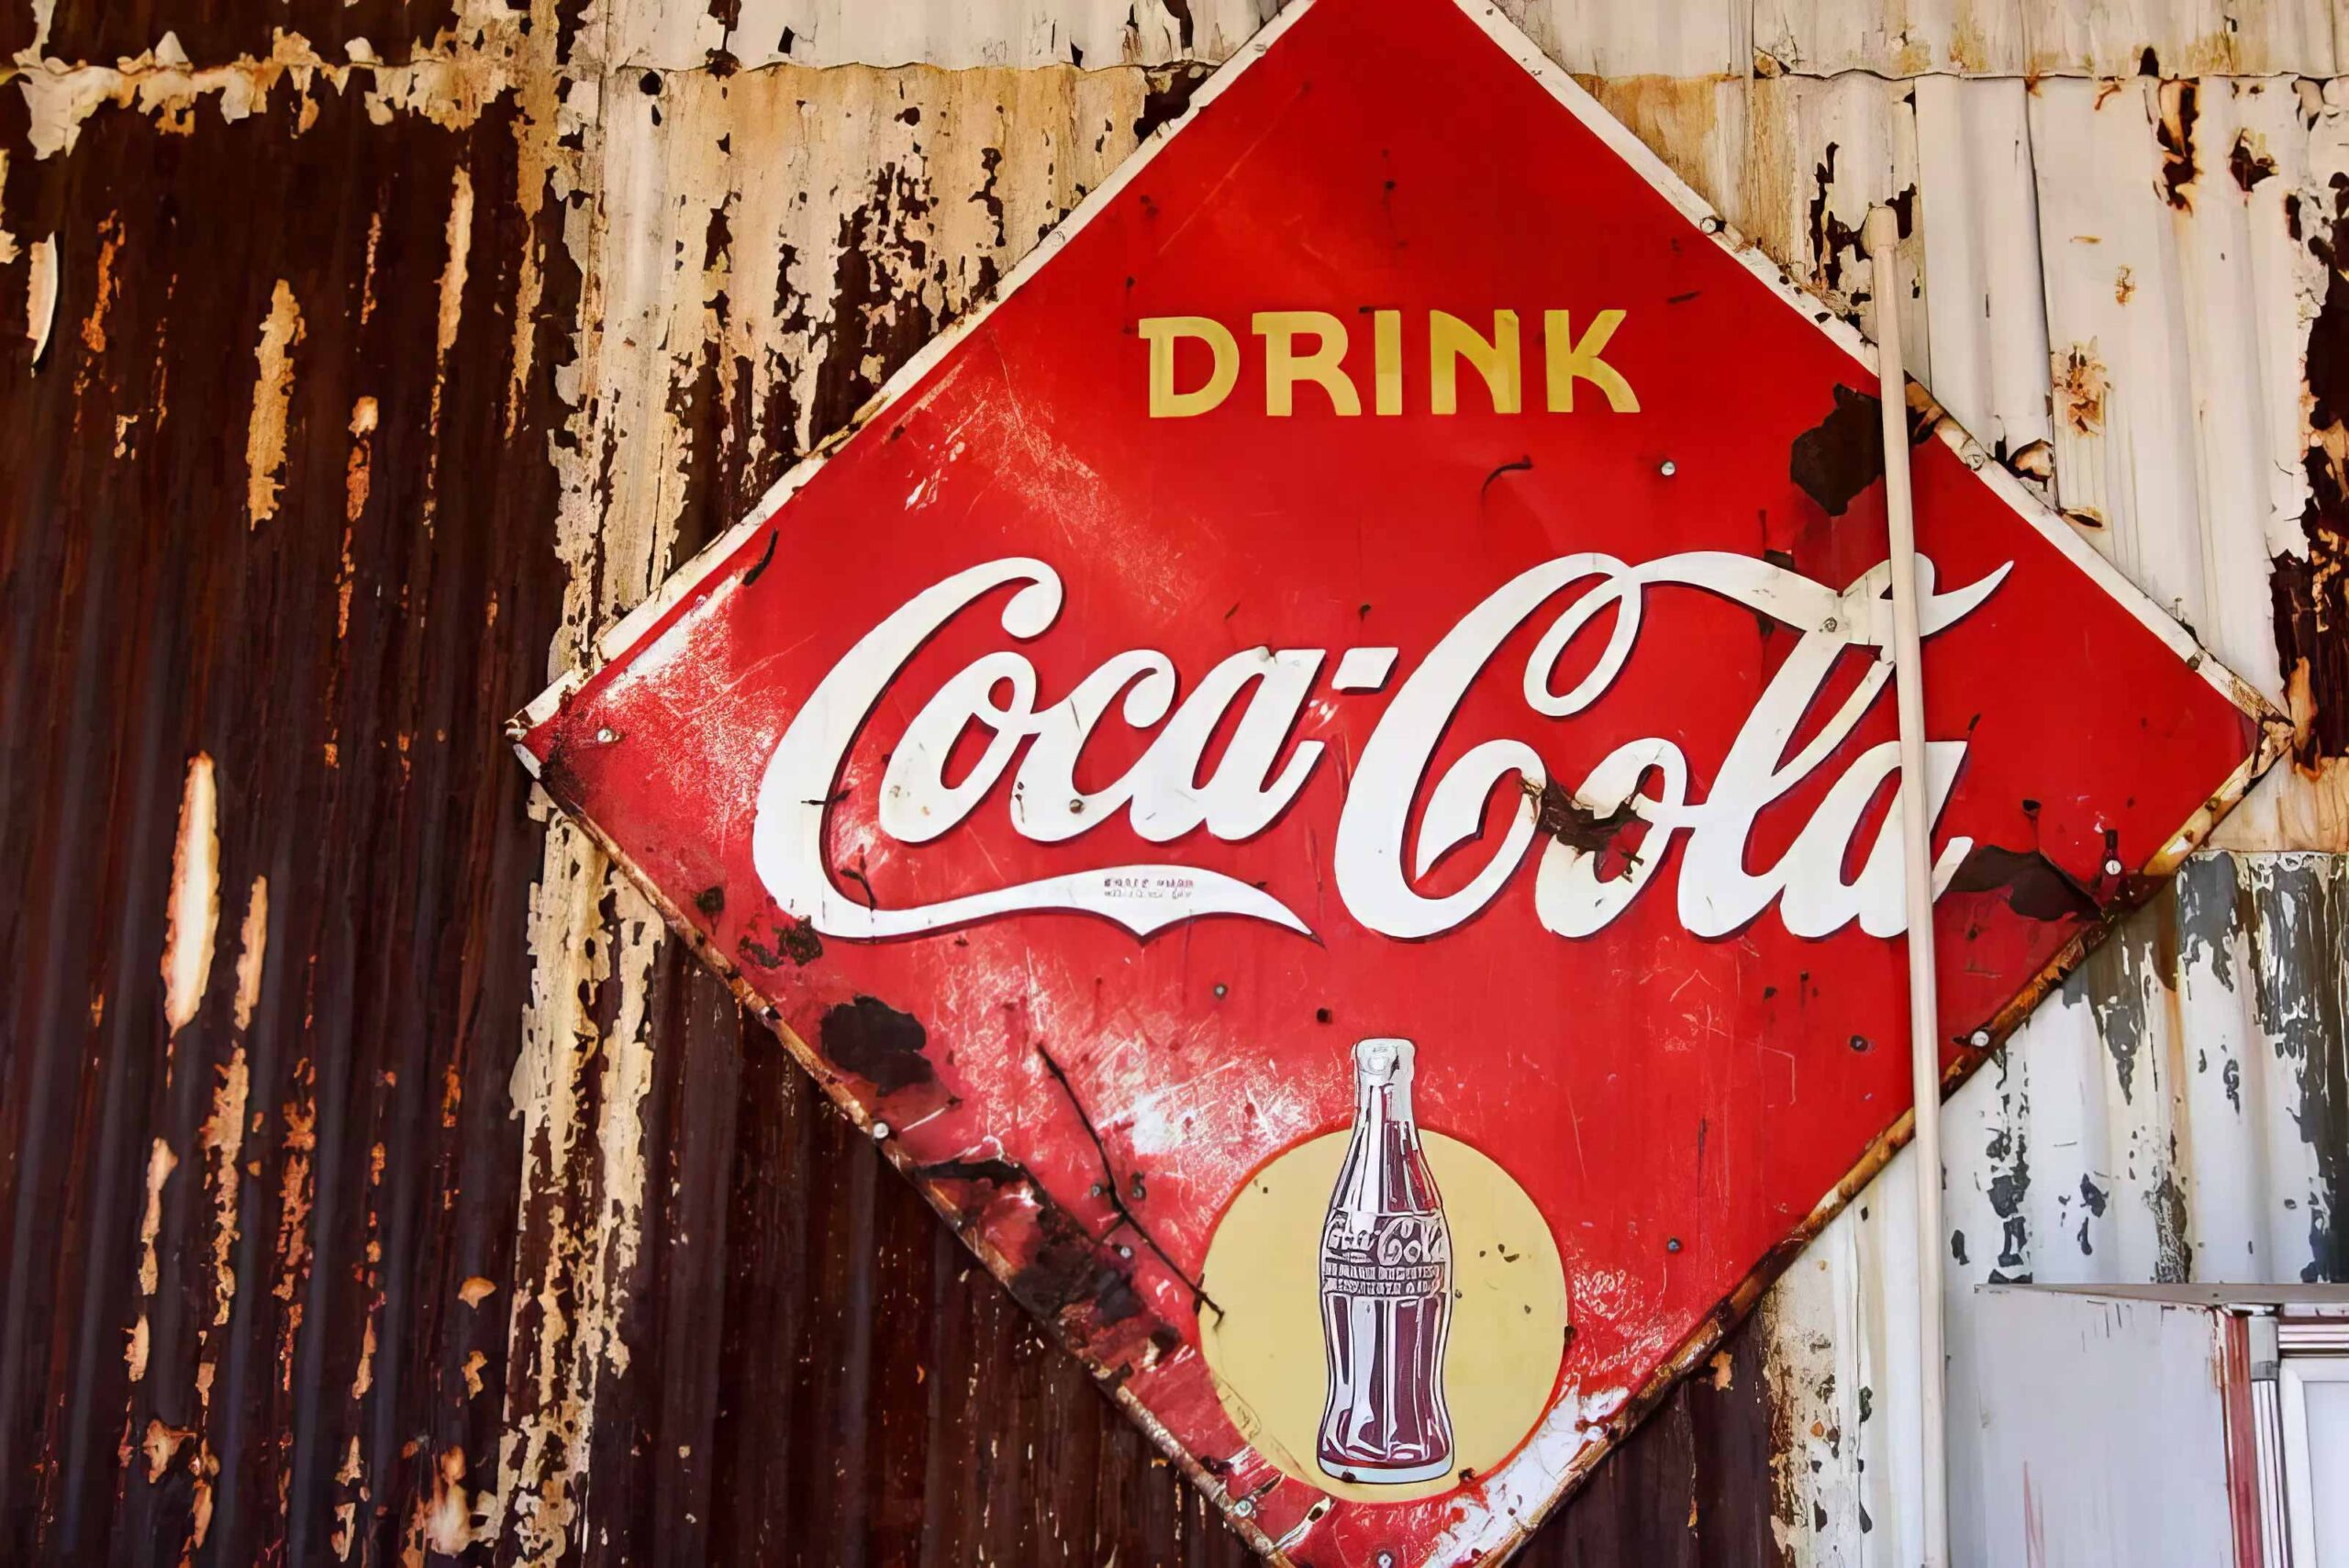 A Journey Through the Golden Era of Vintage Signs